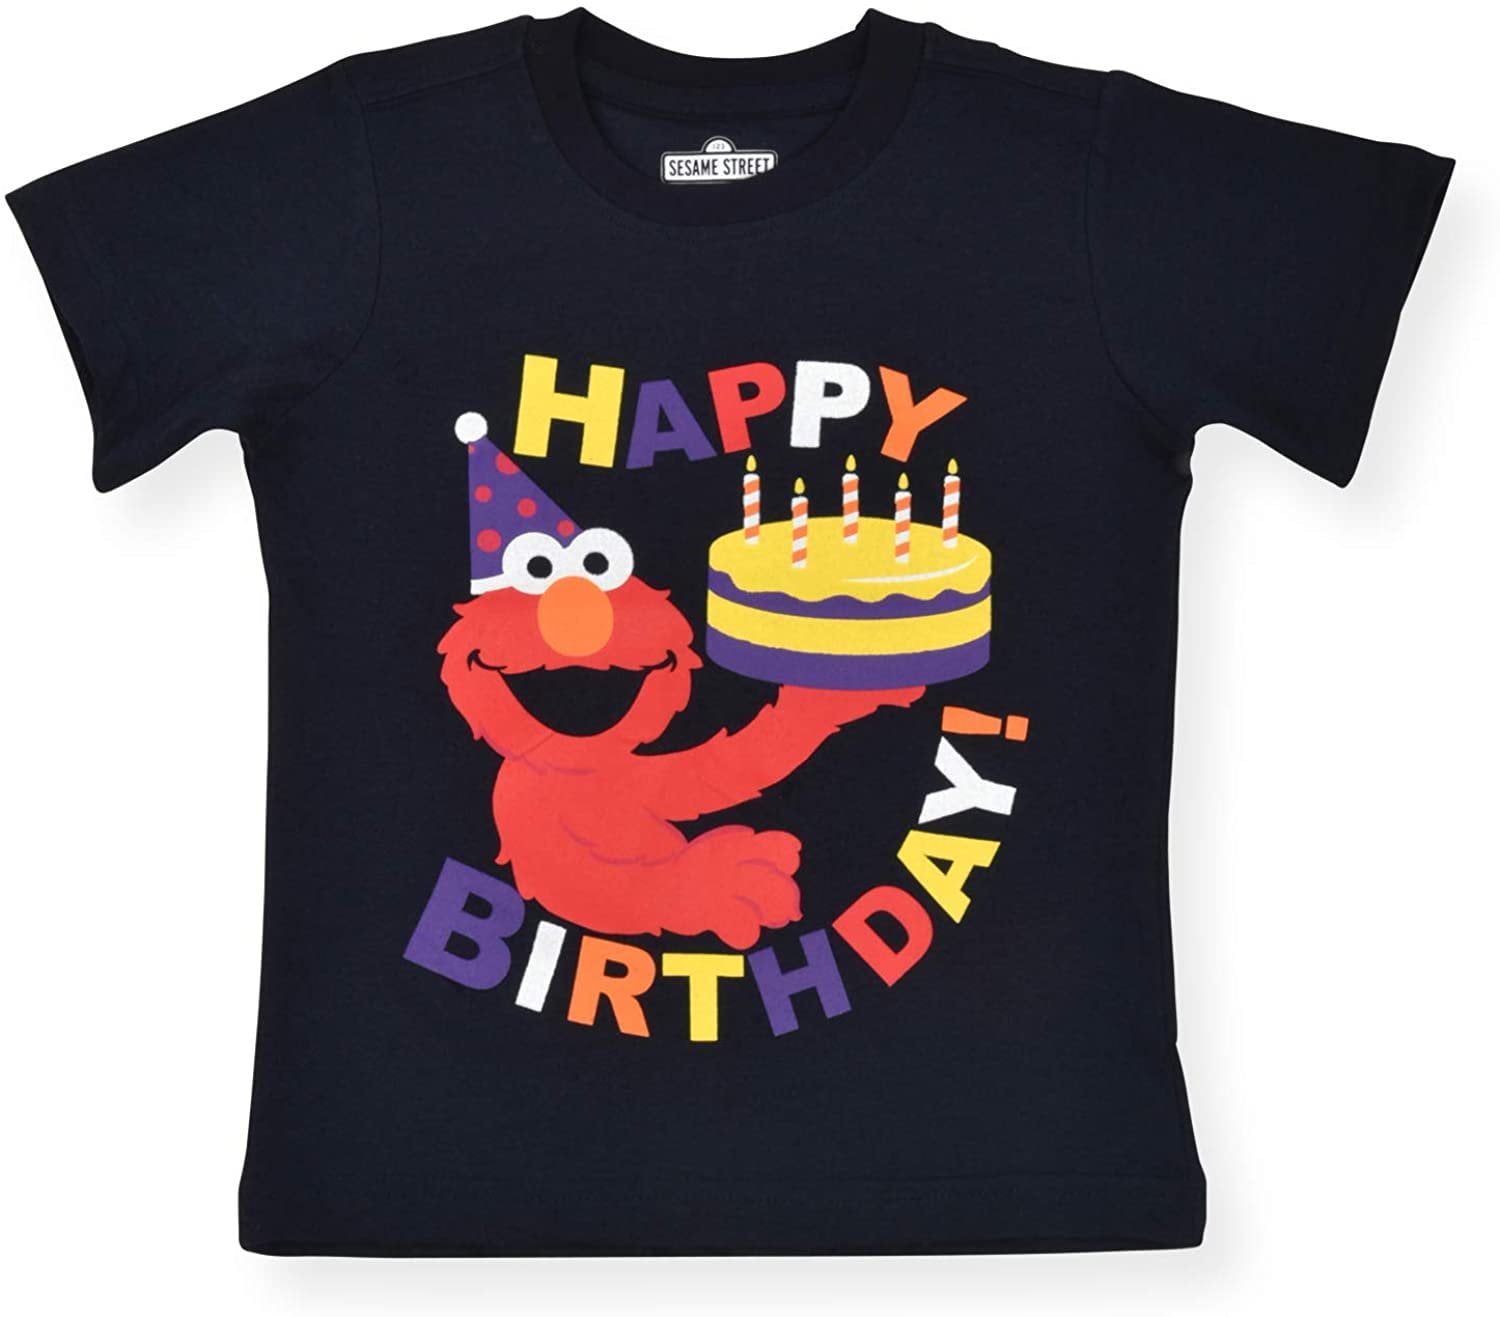 Elmo Toddler Boys Navy Character Top Two-Piece Short Set Size 2T 3T 4T